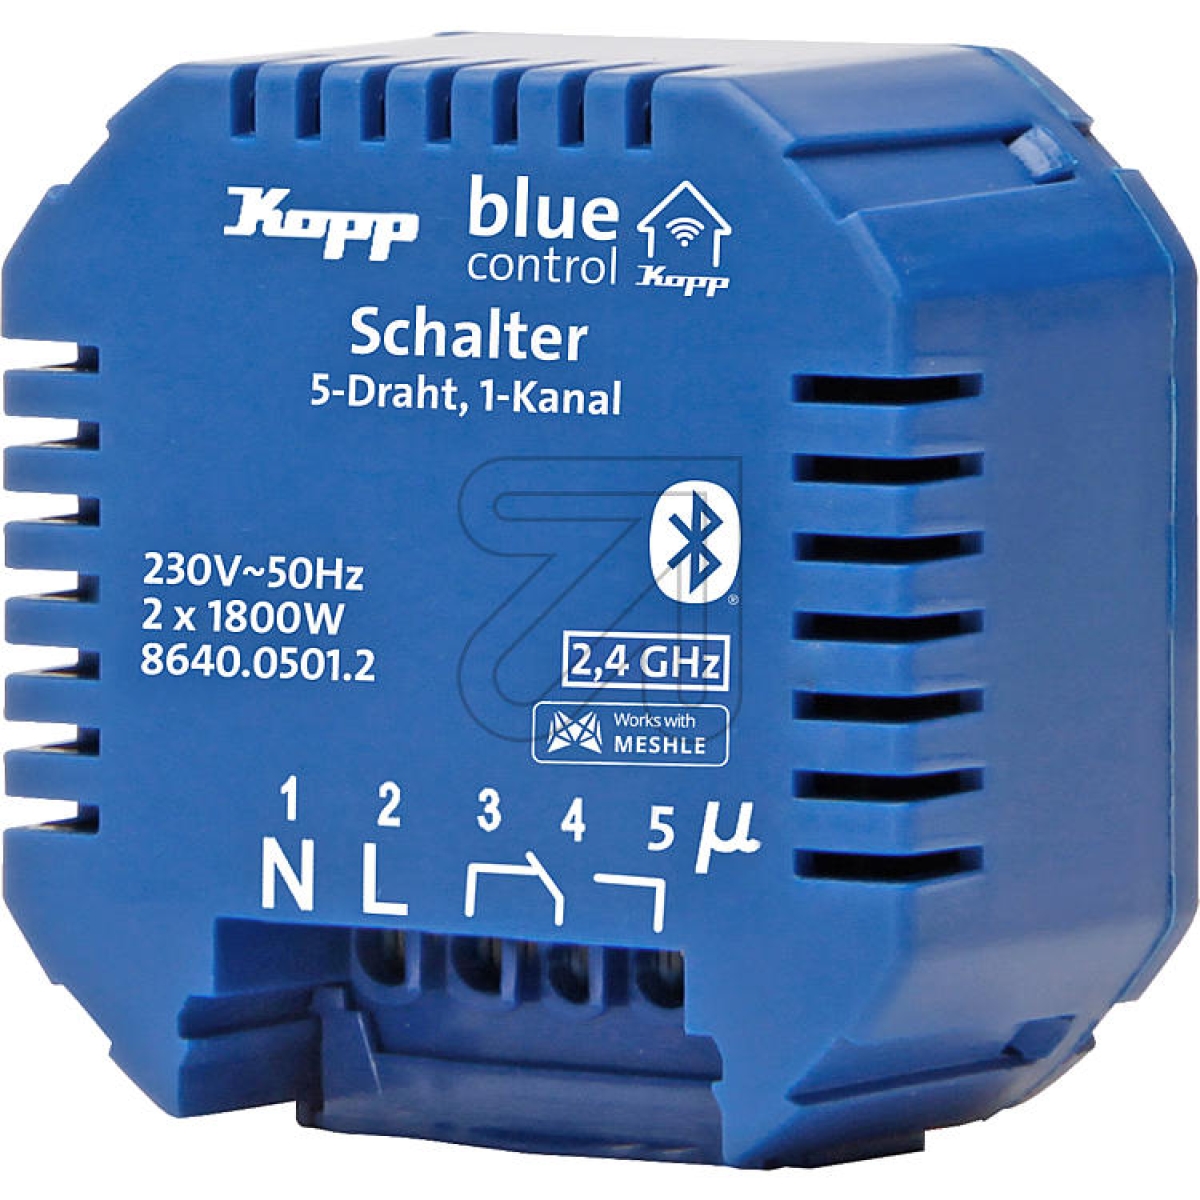 KoppBlue-control switch actuator 5 wire/1 channel 864005012